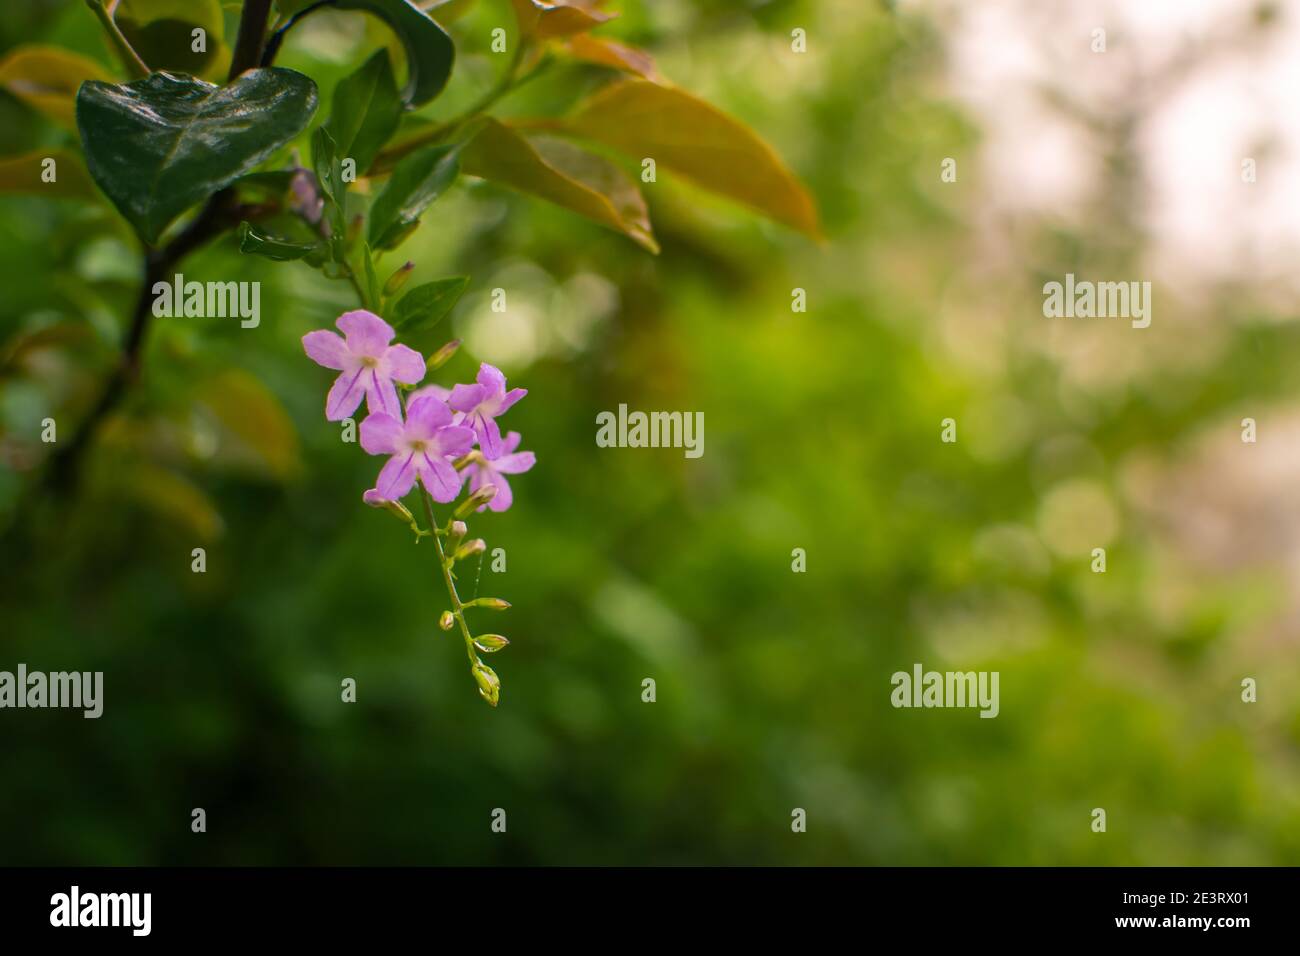 Purple colored Duranta shrub flower with green blurry bokeh background and copy space. This plant widely cultivated in gardens as ornamental and fenci Stock Photo